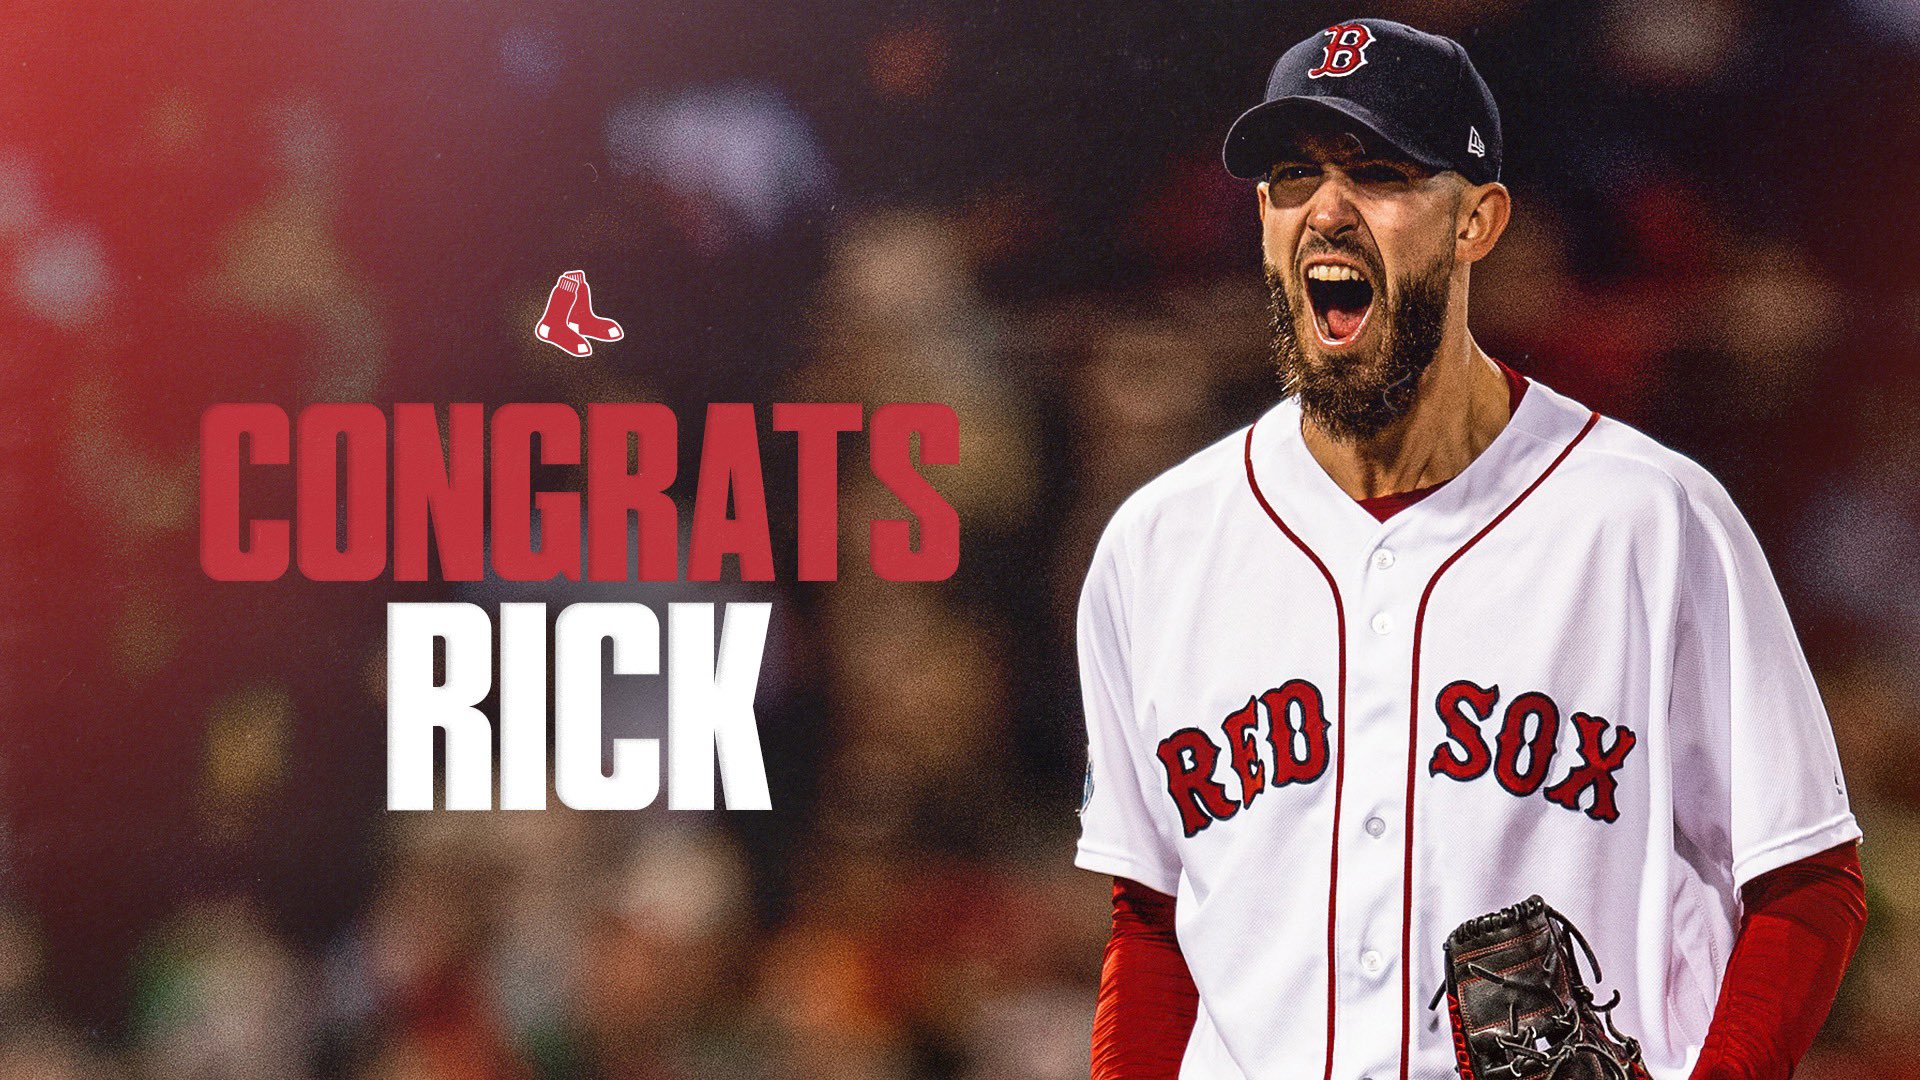 Red Sox on X: A Cy Young Winner & World Series Champ. Congrats on a  great career and best of luck in retirement, Rick!   / X